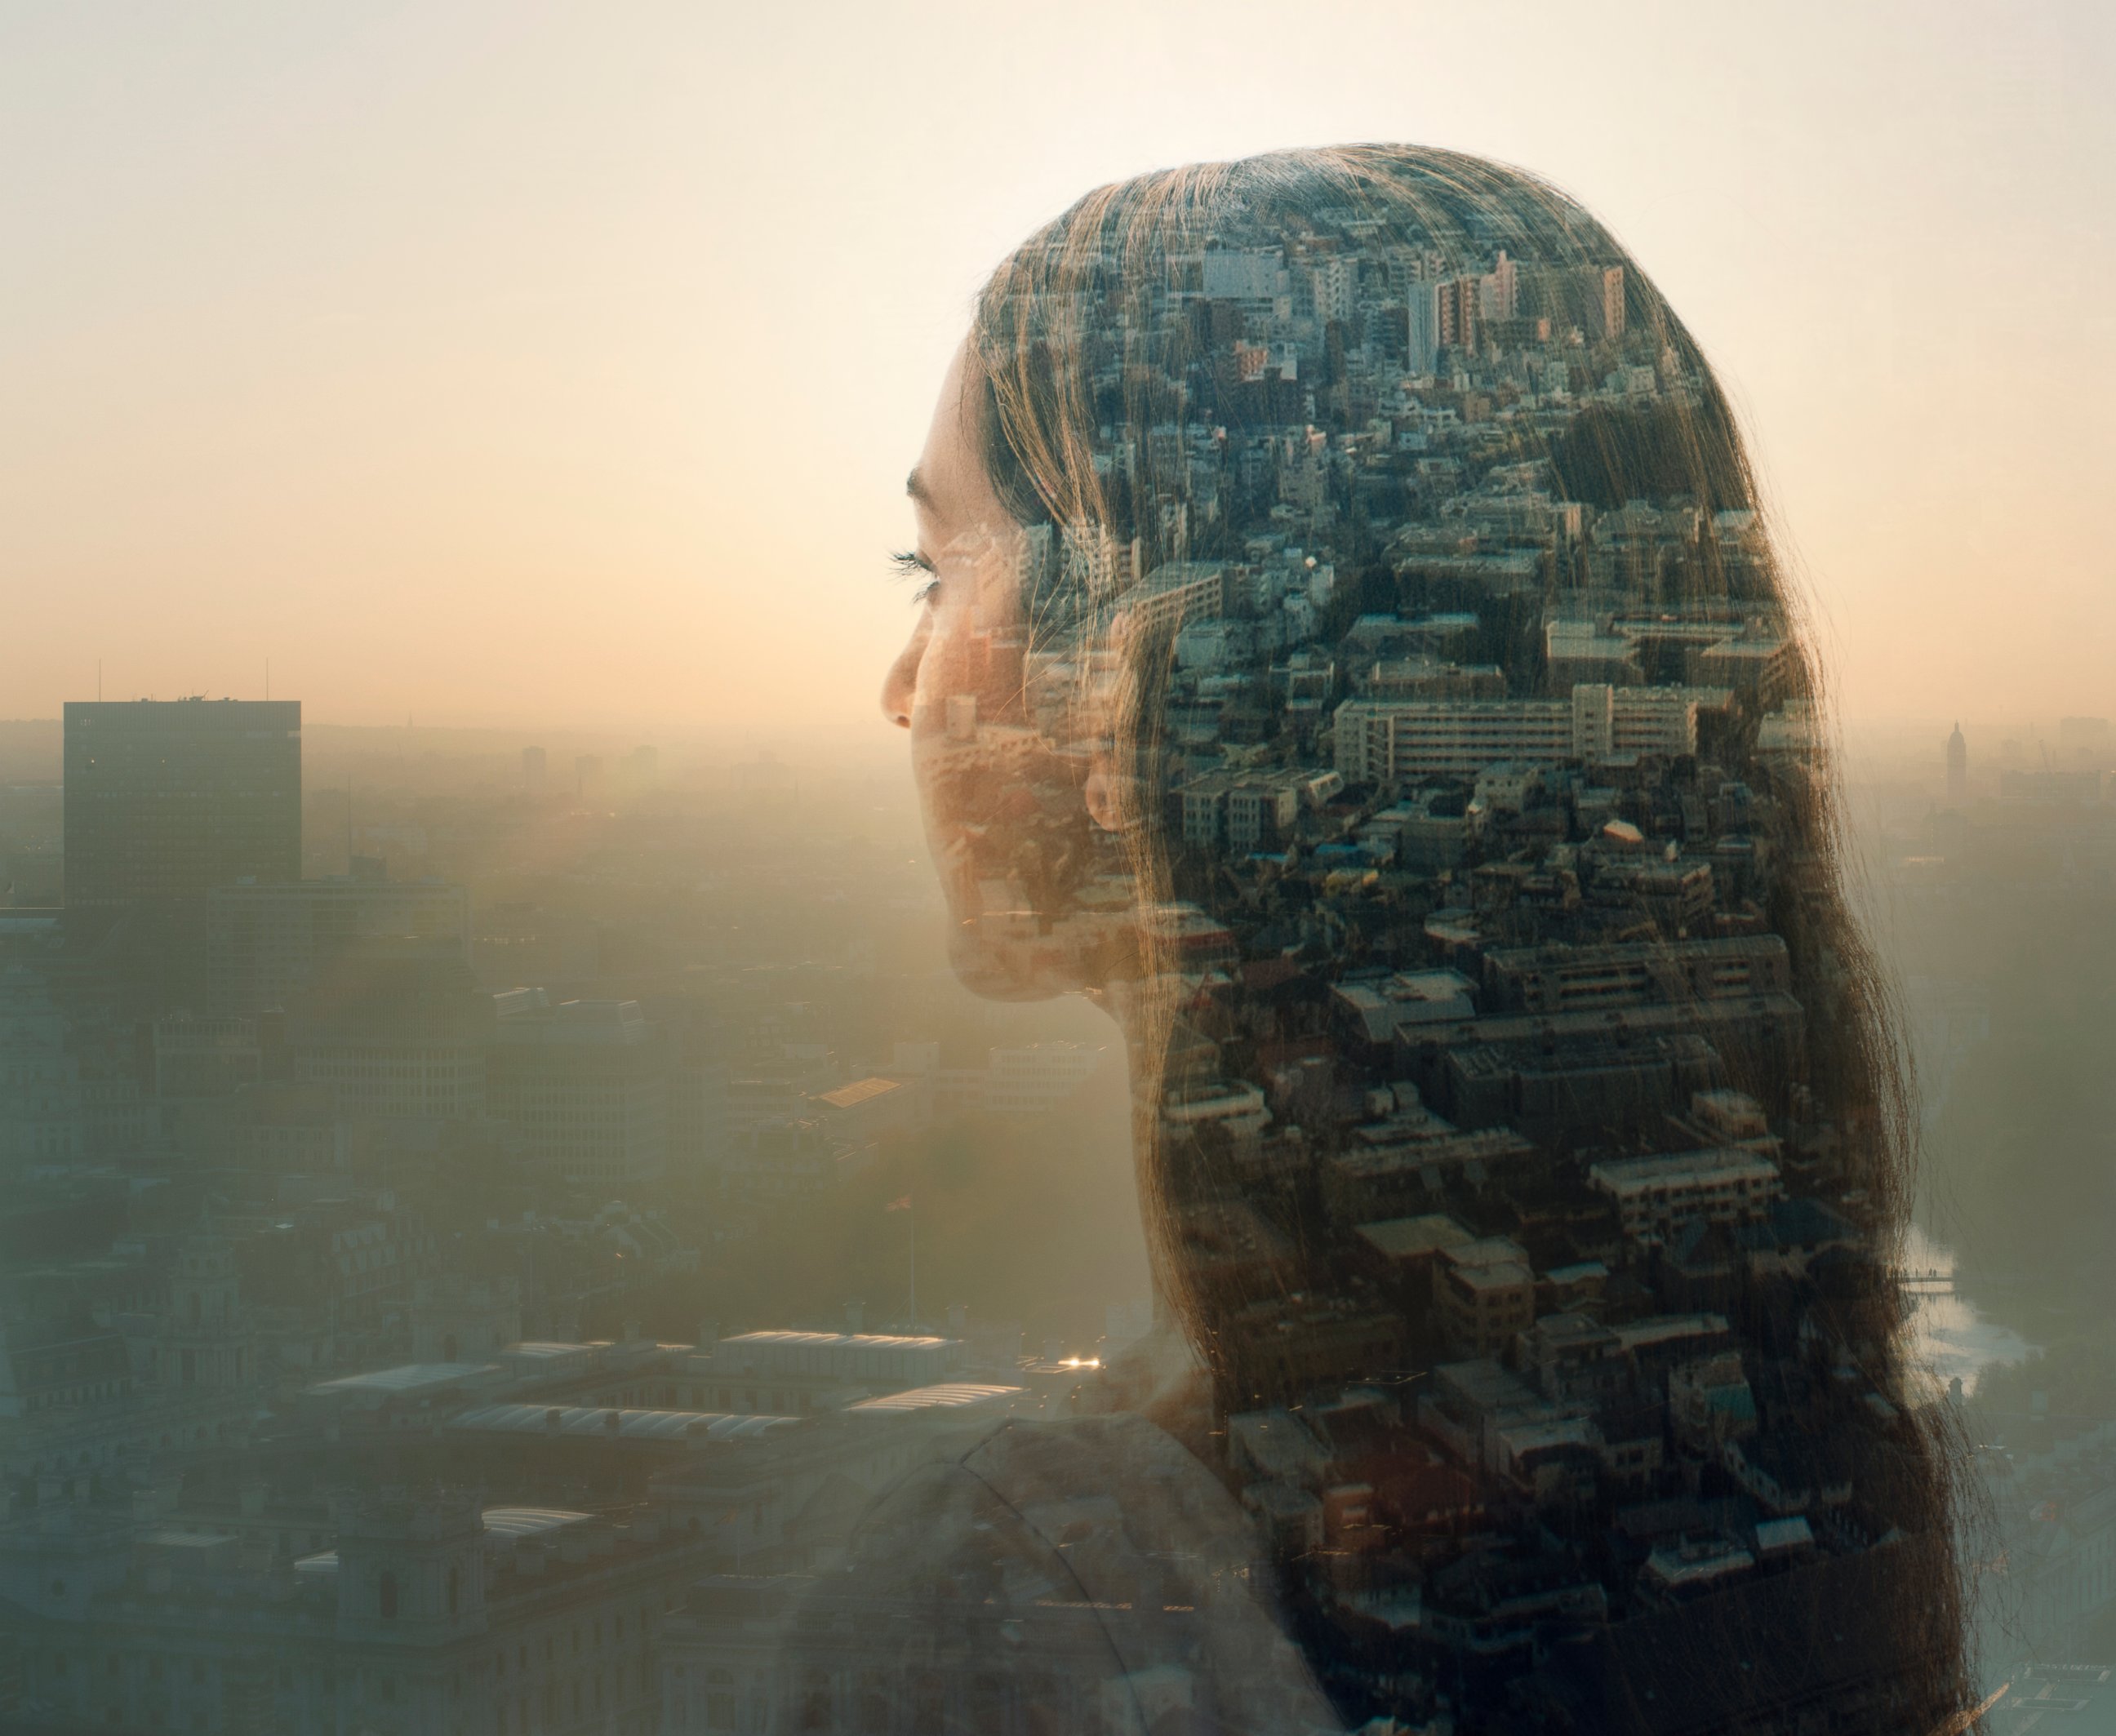 PHOTO: Double exposure photography will develop digitally. 